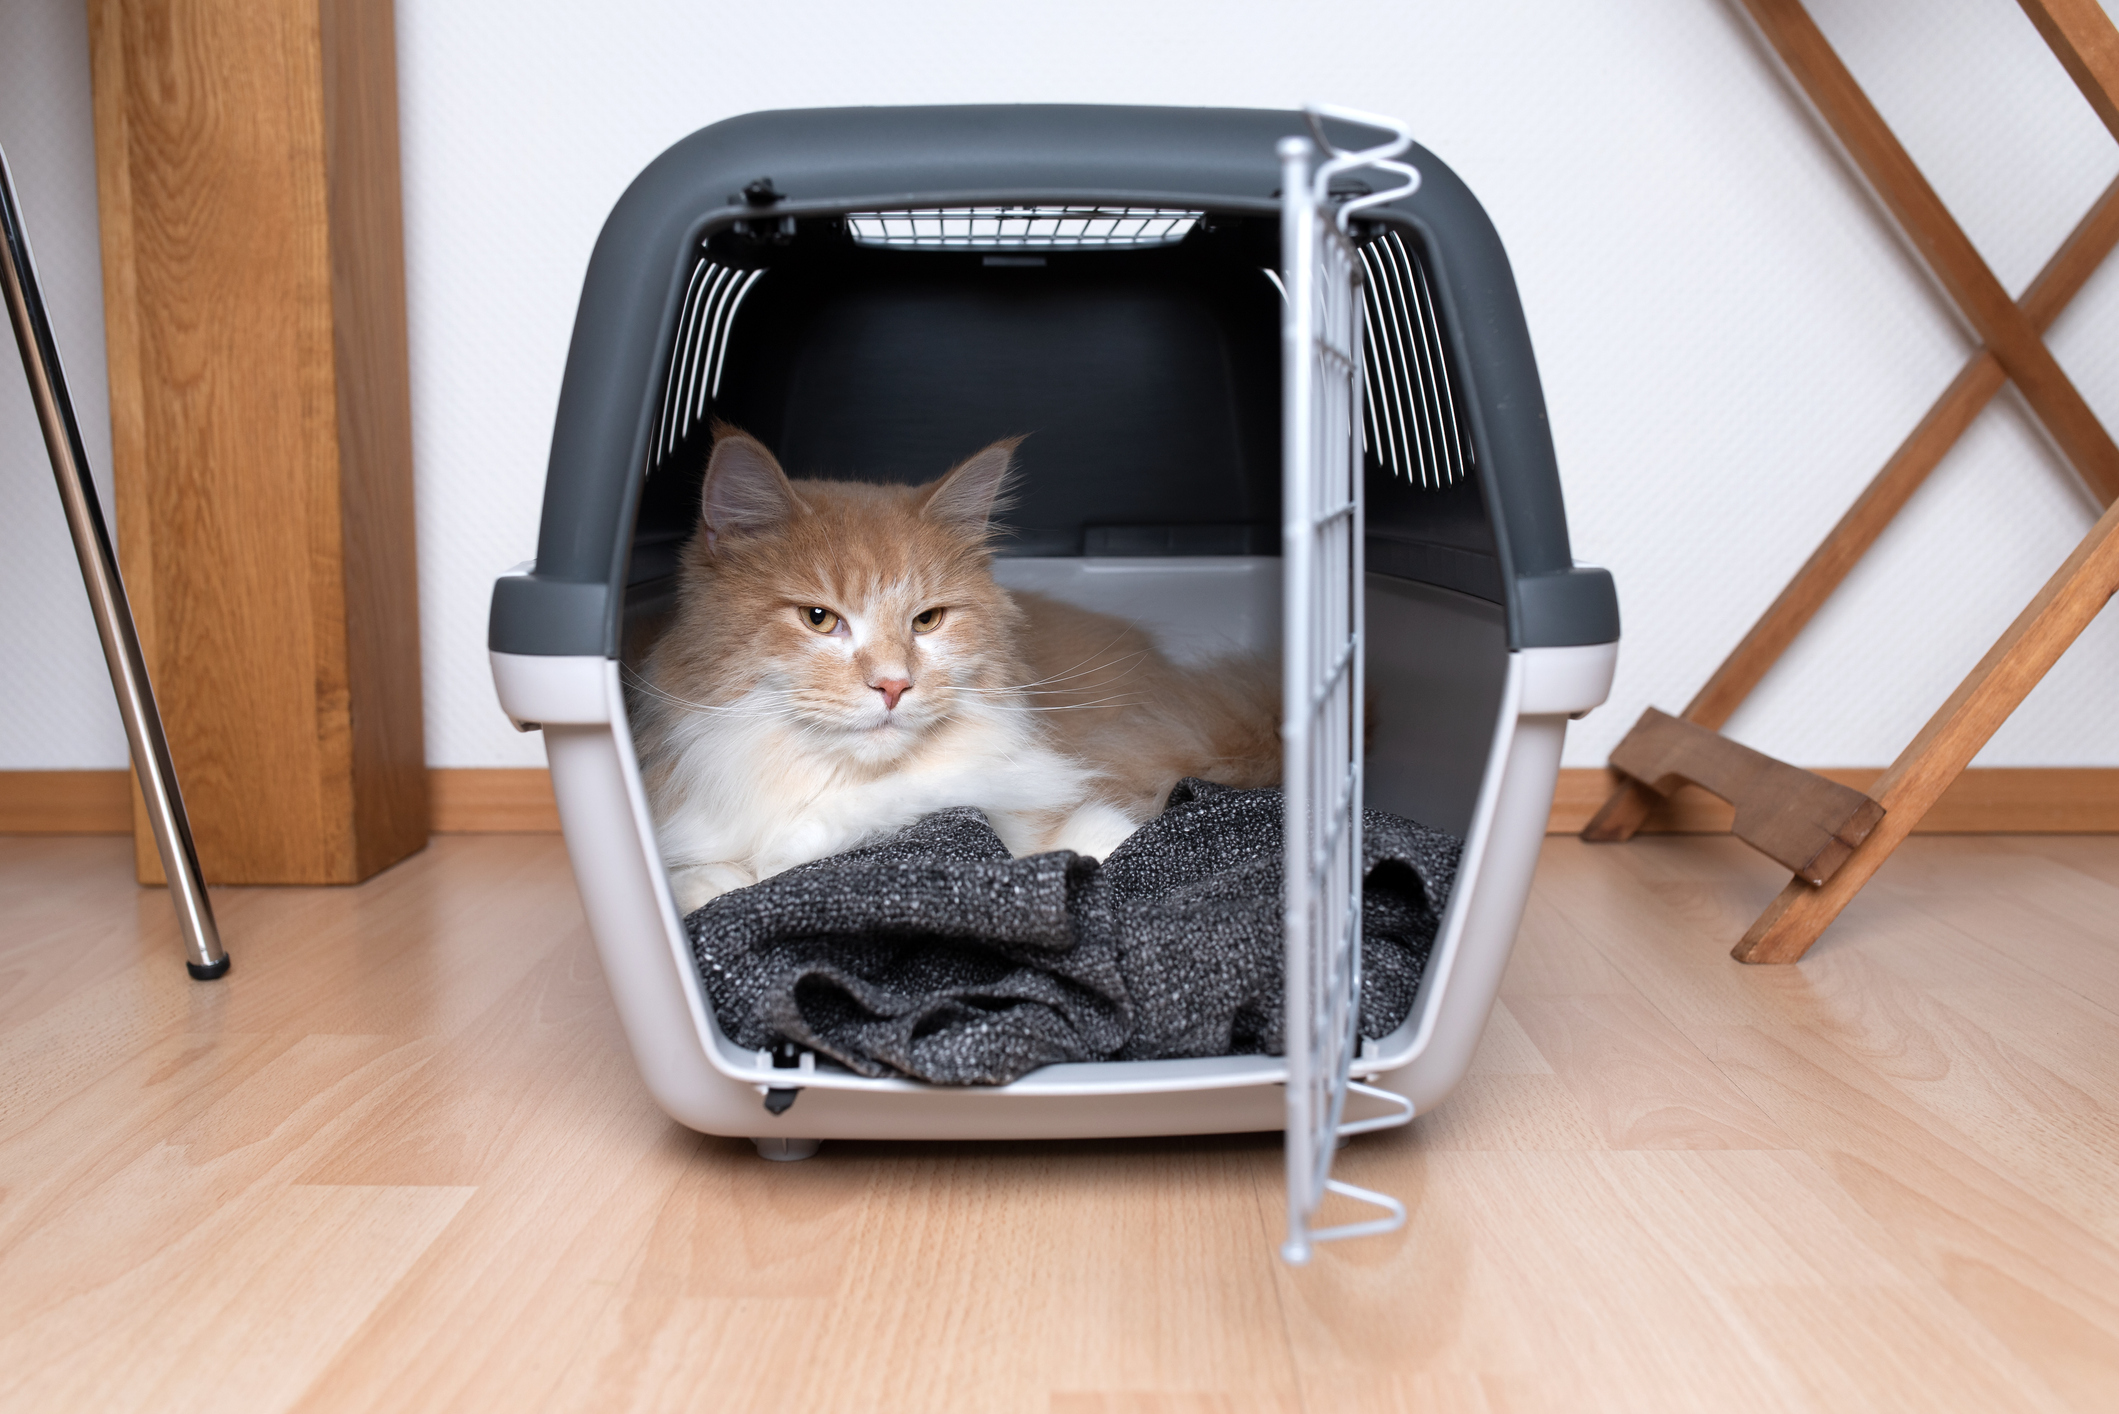 Ginger Maine Coon laying on a blanket in an open cat carrier